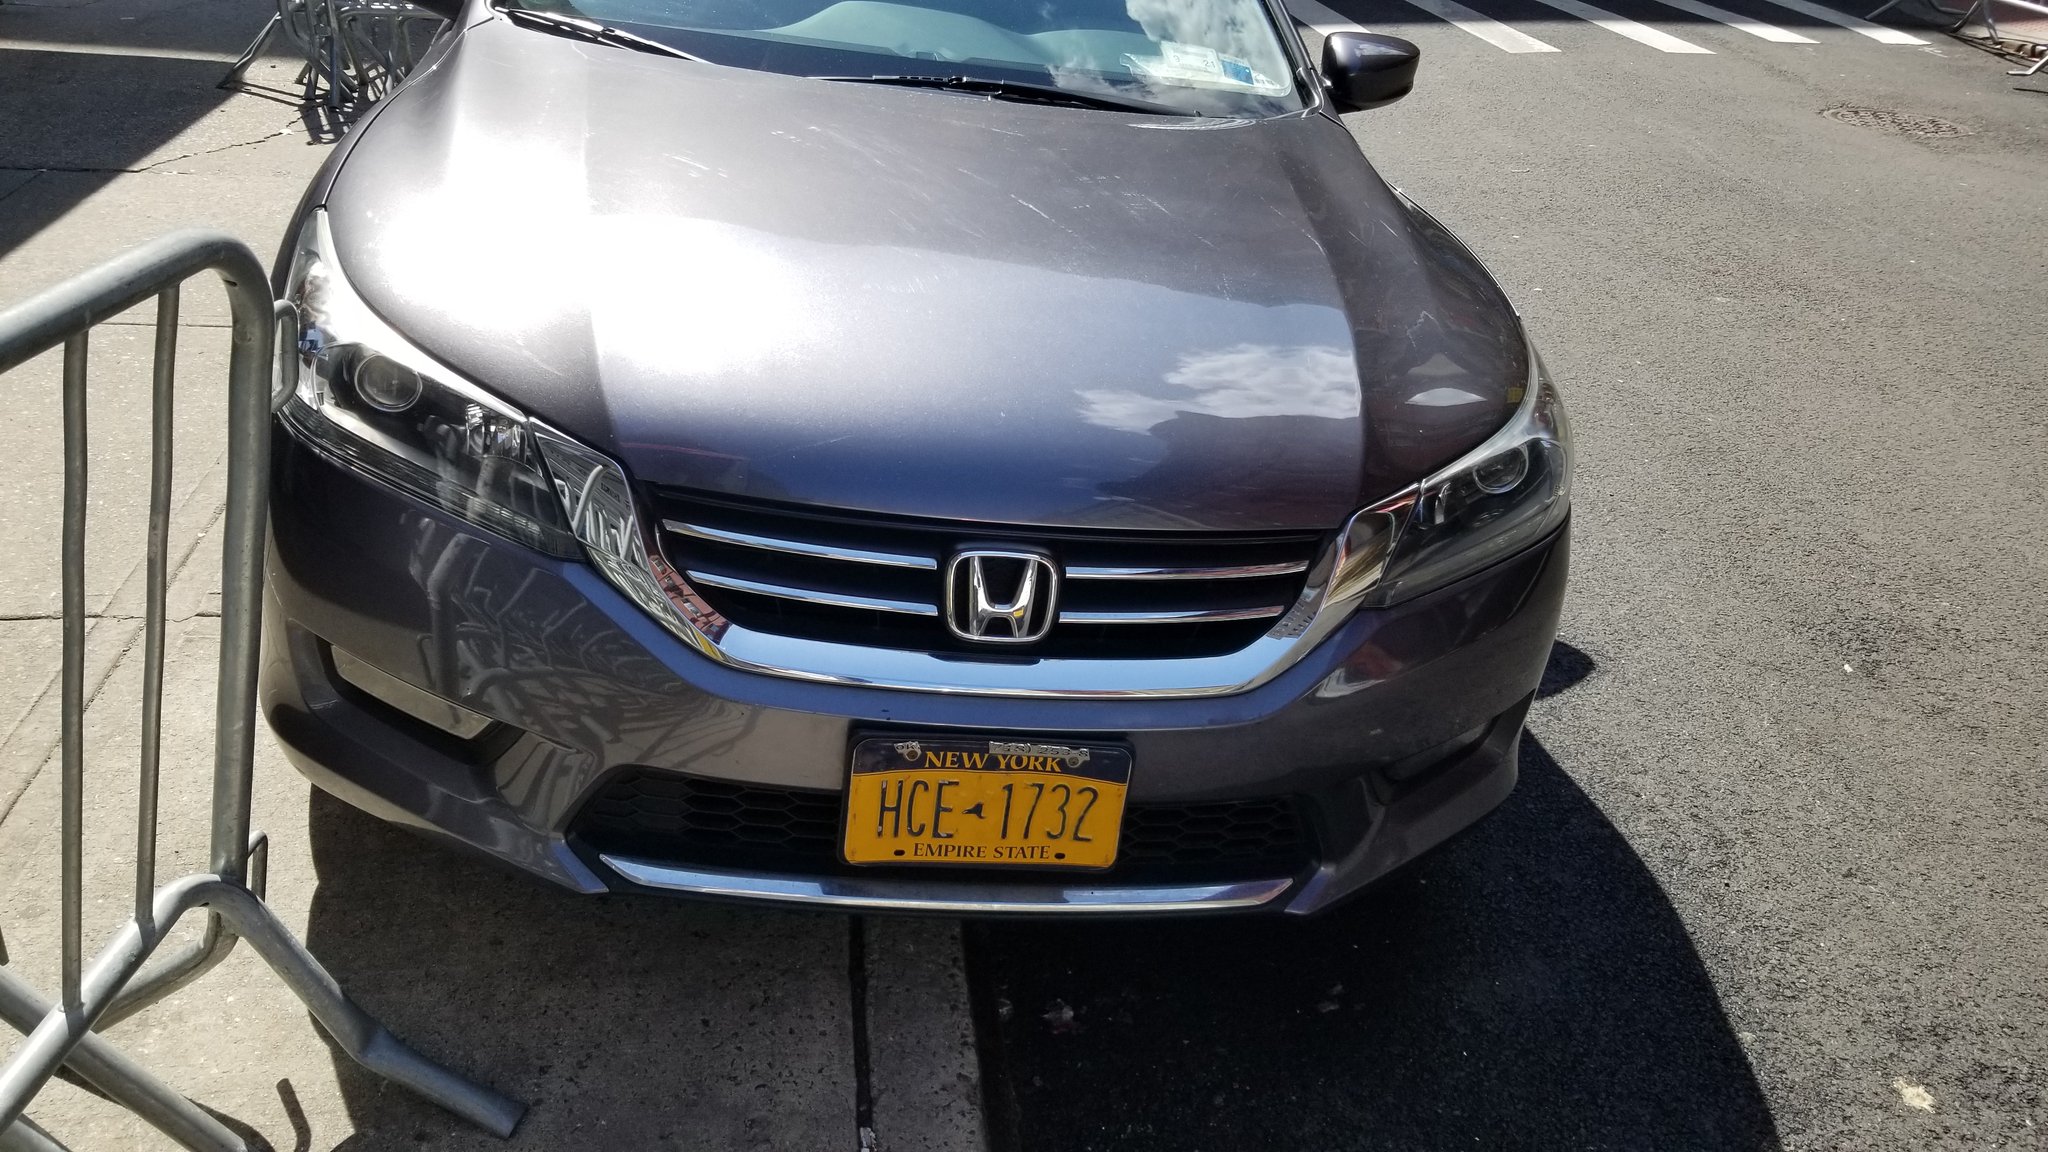 Photo of car in the street with license plate HCE 1732 in New York